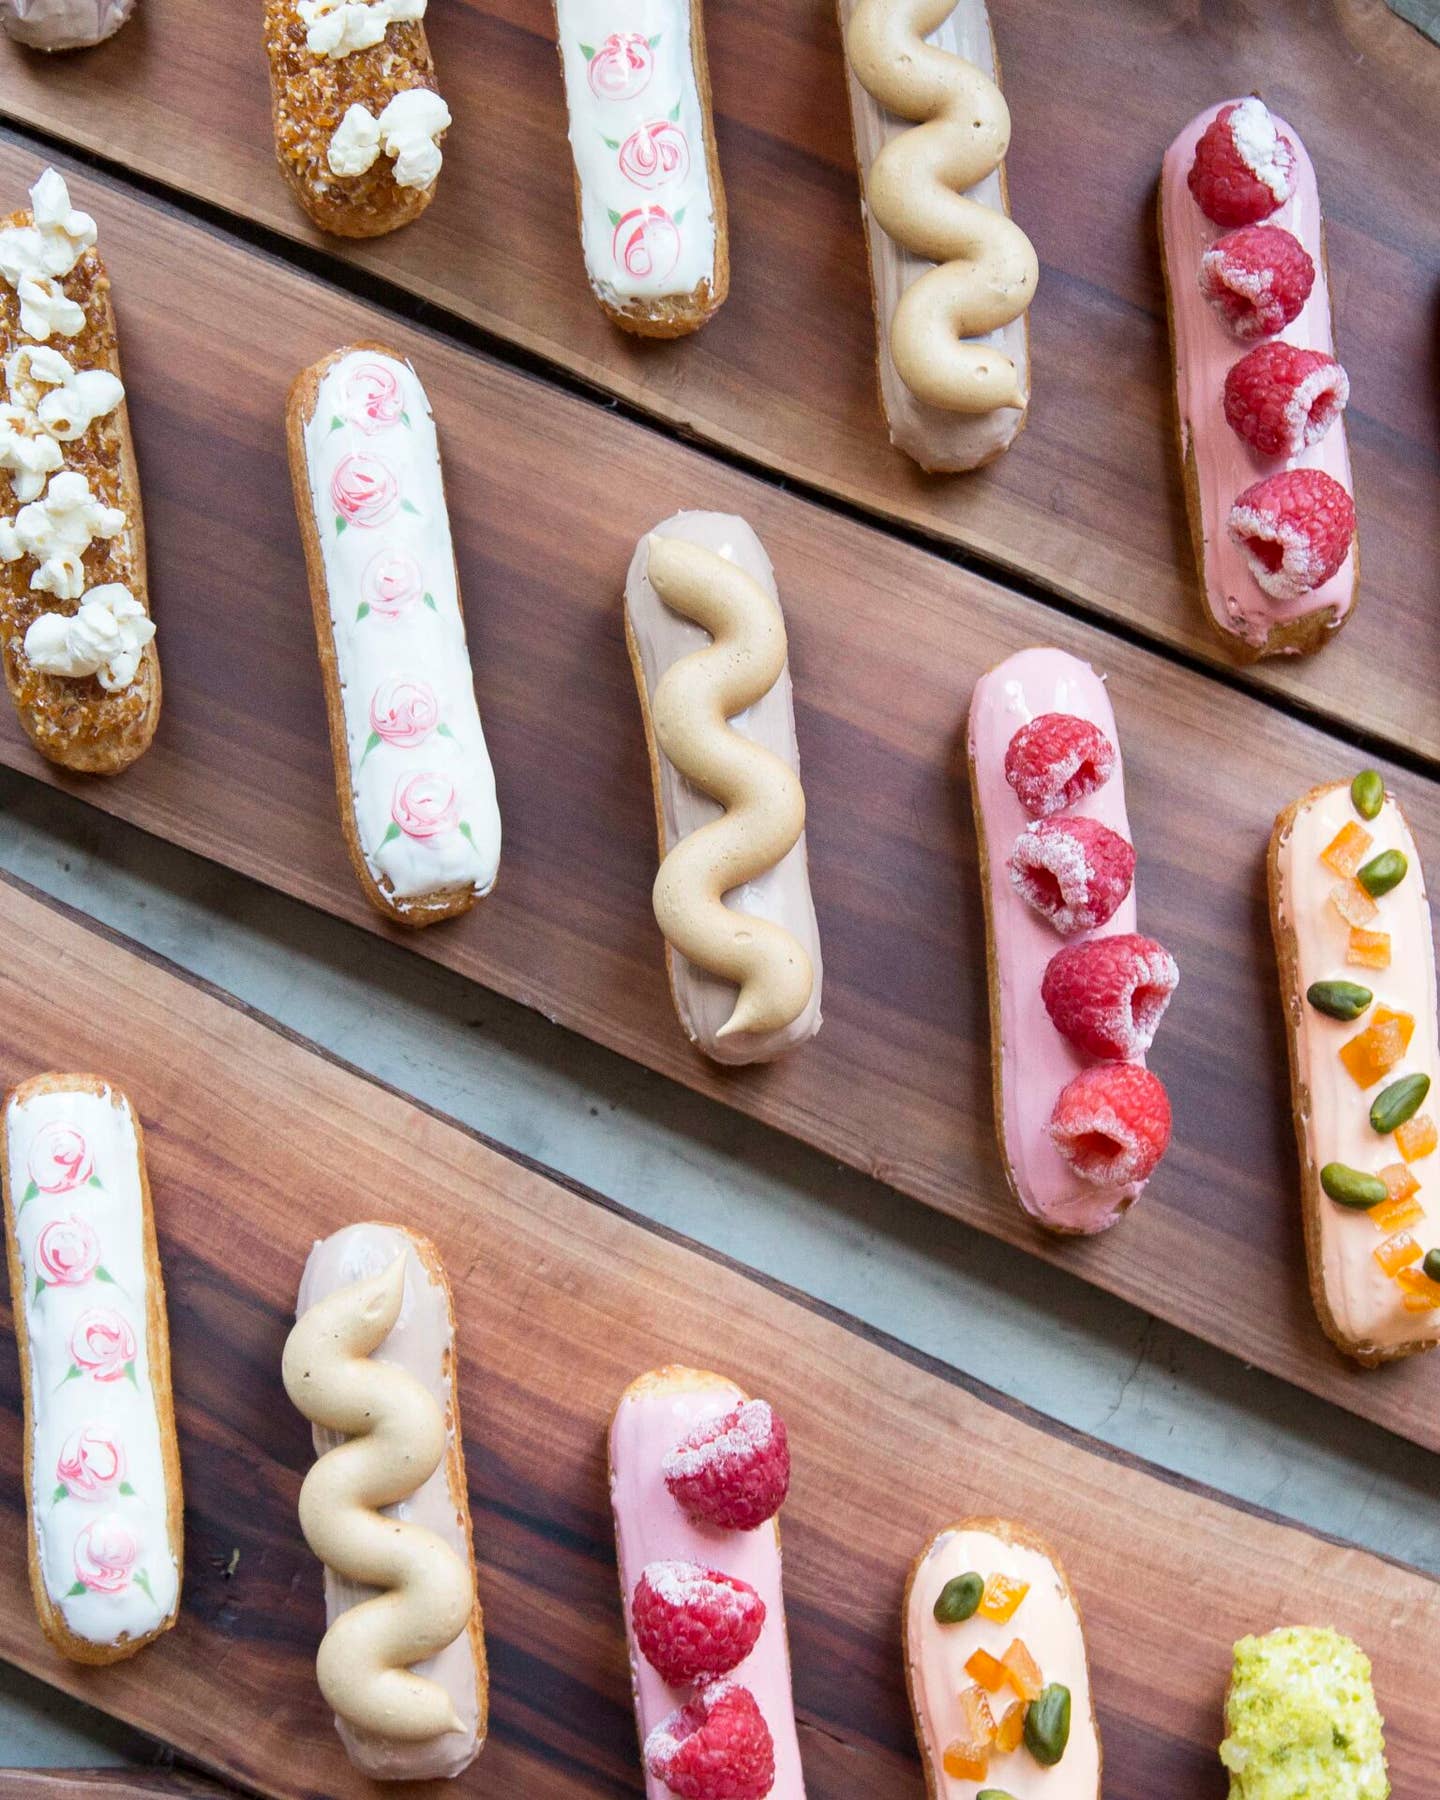 5 Simple Tips for Better Homemade Eclairs